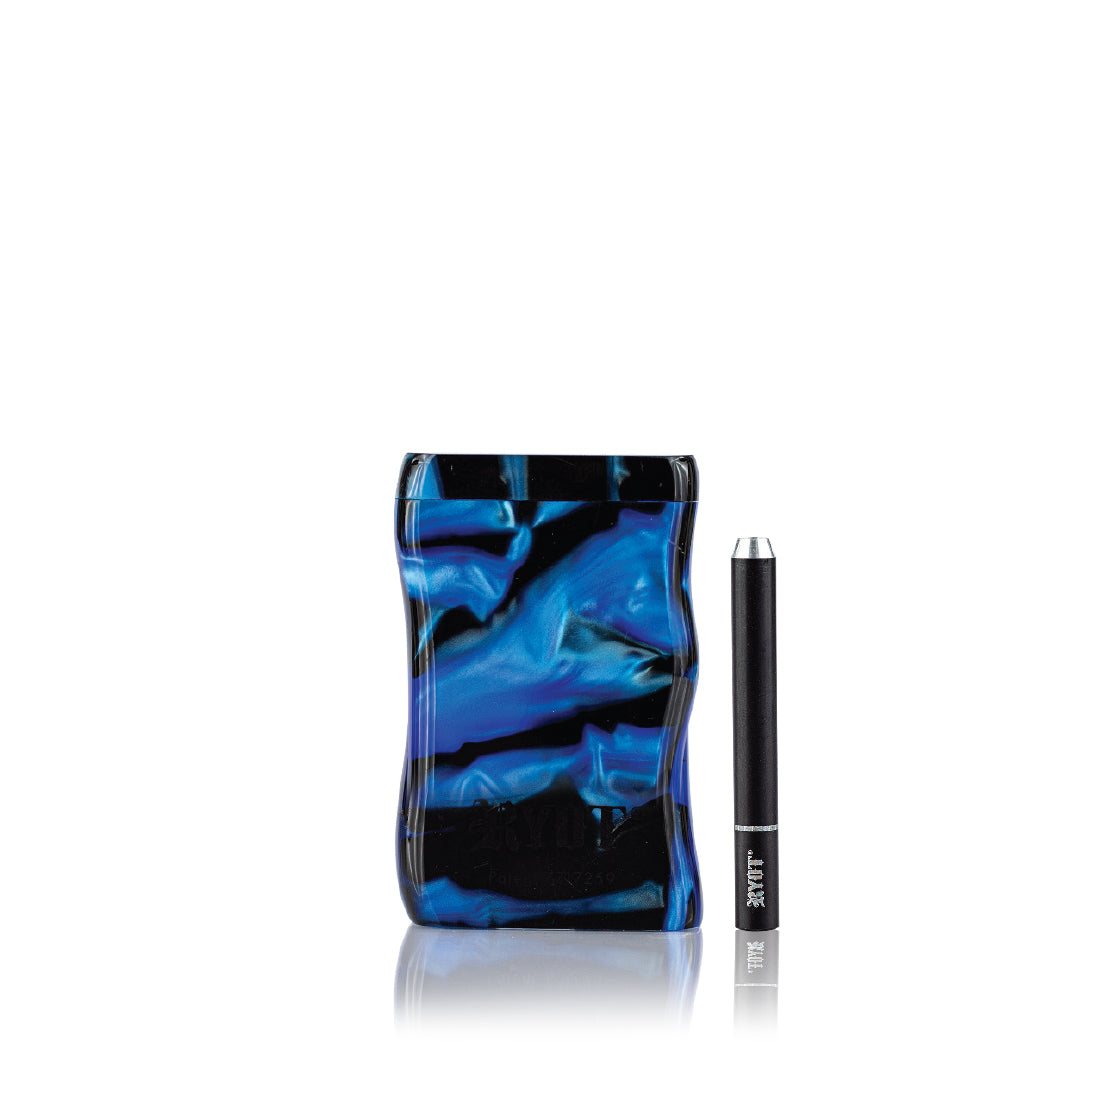 RYOT - Acrylic Magnetic Short Dugout with Anodized One Hitter